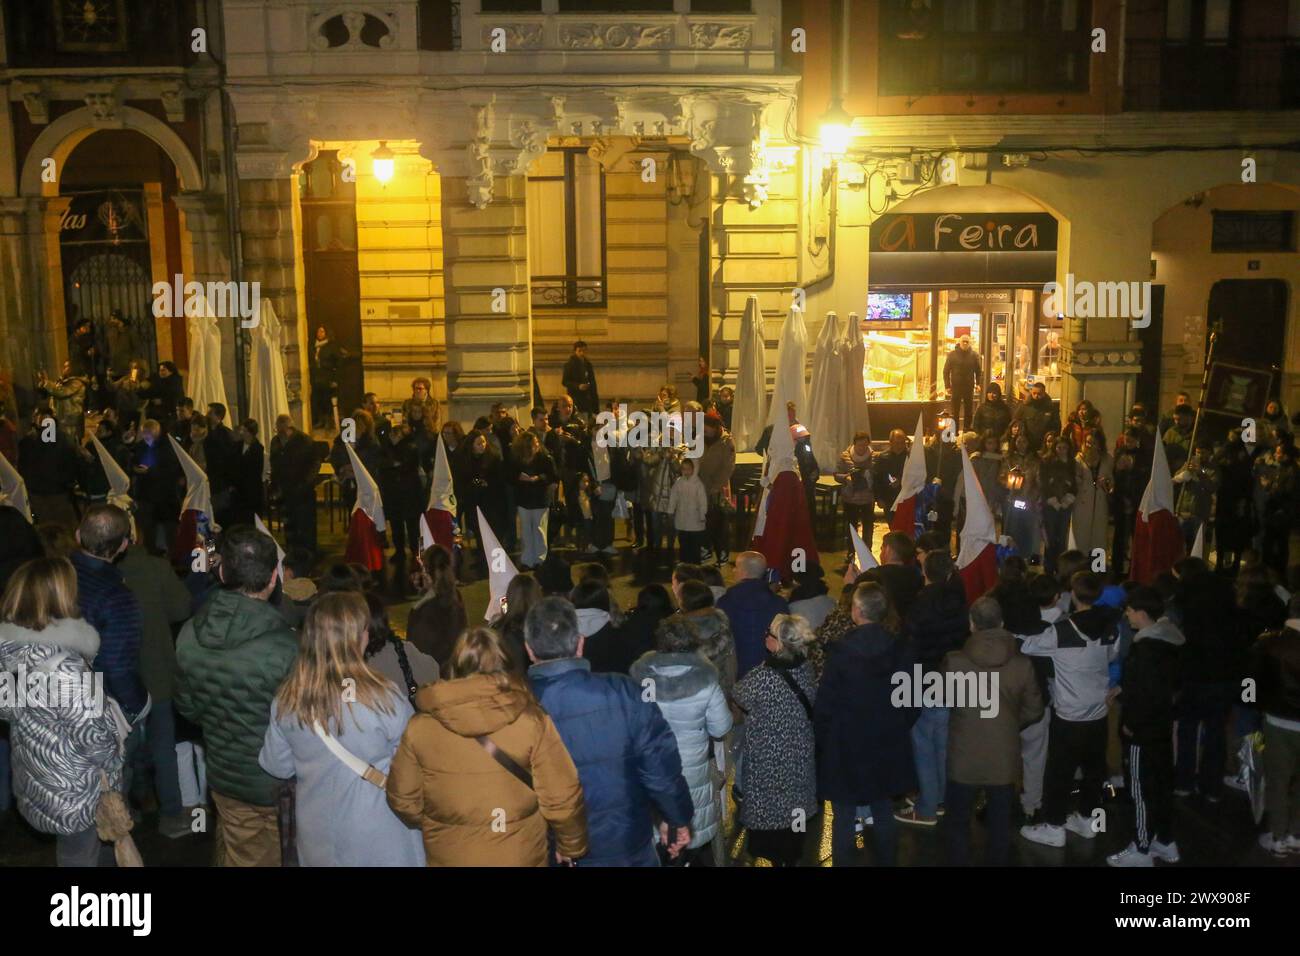 Avilés, Spain, March 28, 2024: Thousands of people took to the streets of Avilés braving the rain during the Procession of Silence, on March 28, 2024, in Avilés, Spain. Credit: Alberto Brevers / Alamy Live News. Stock Photo